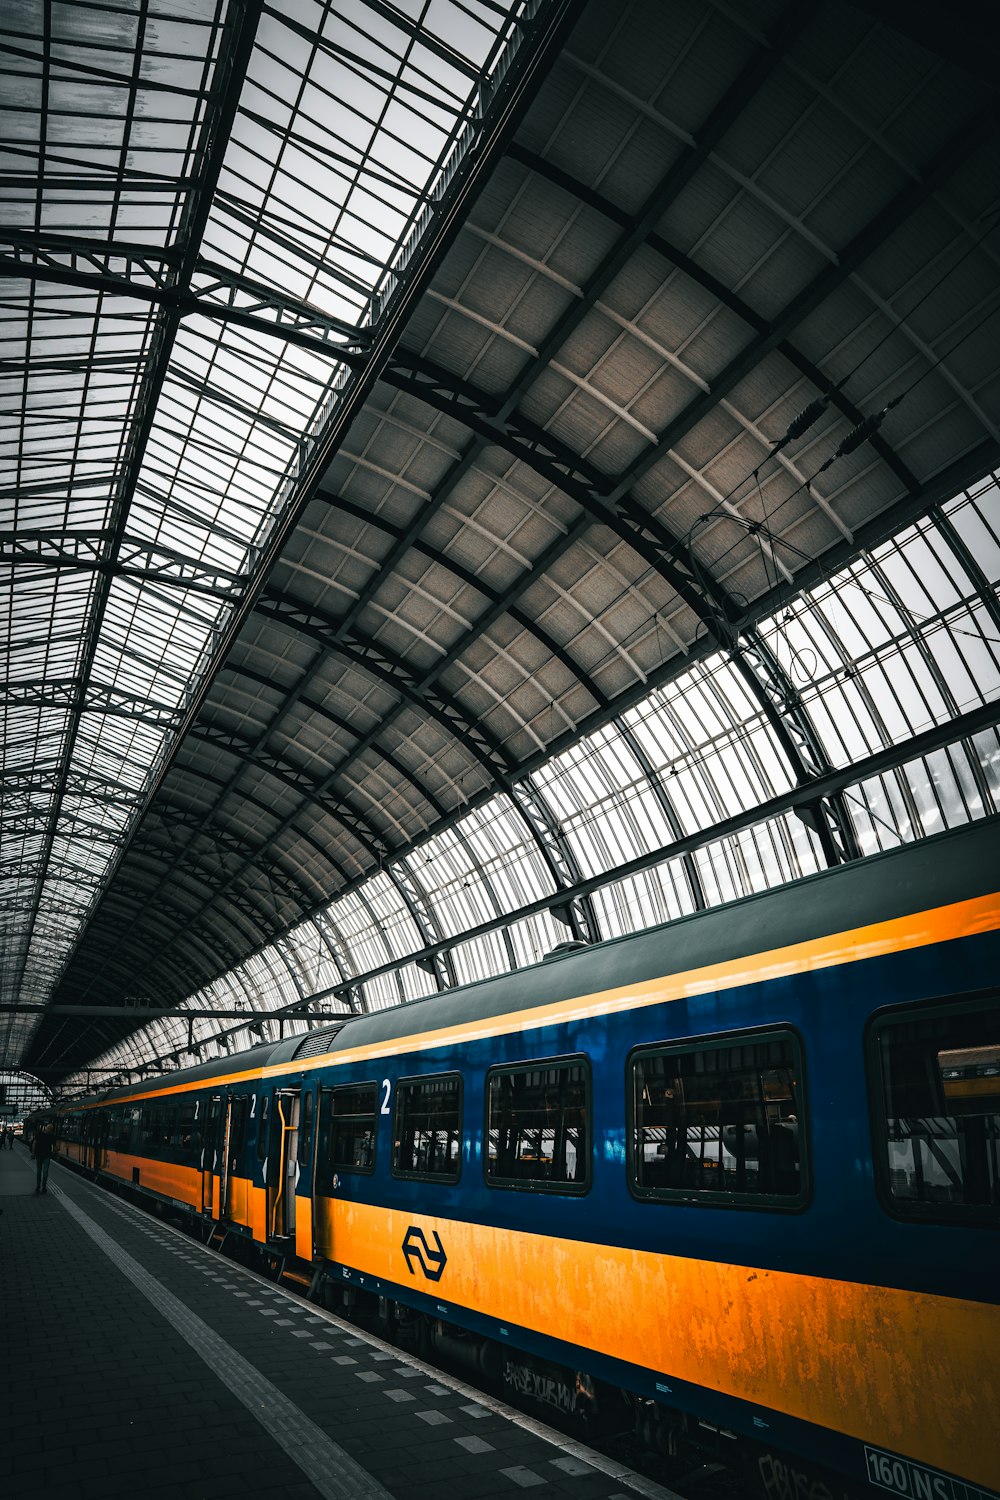 a blue and yellow train parked in a train station